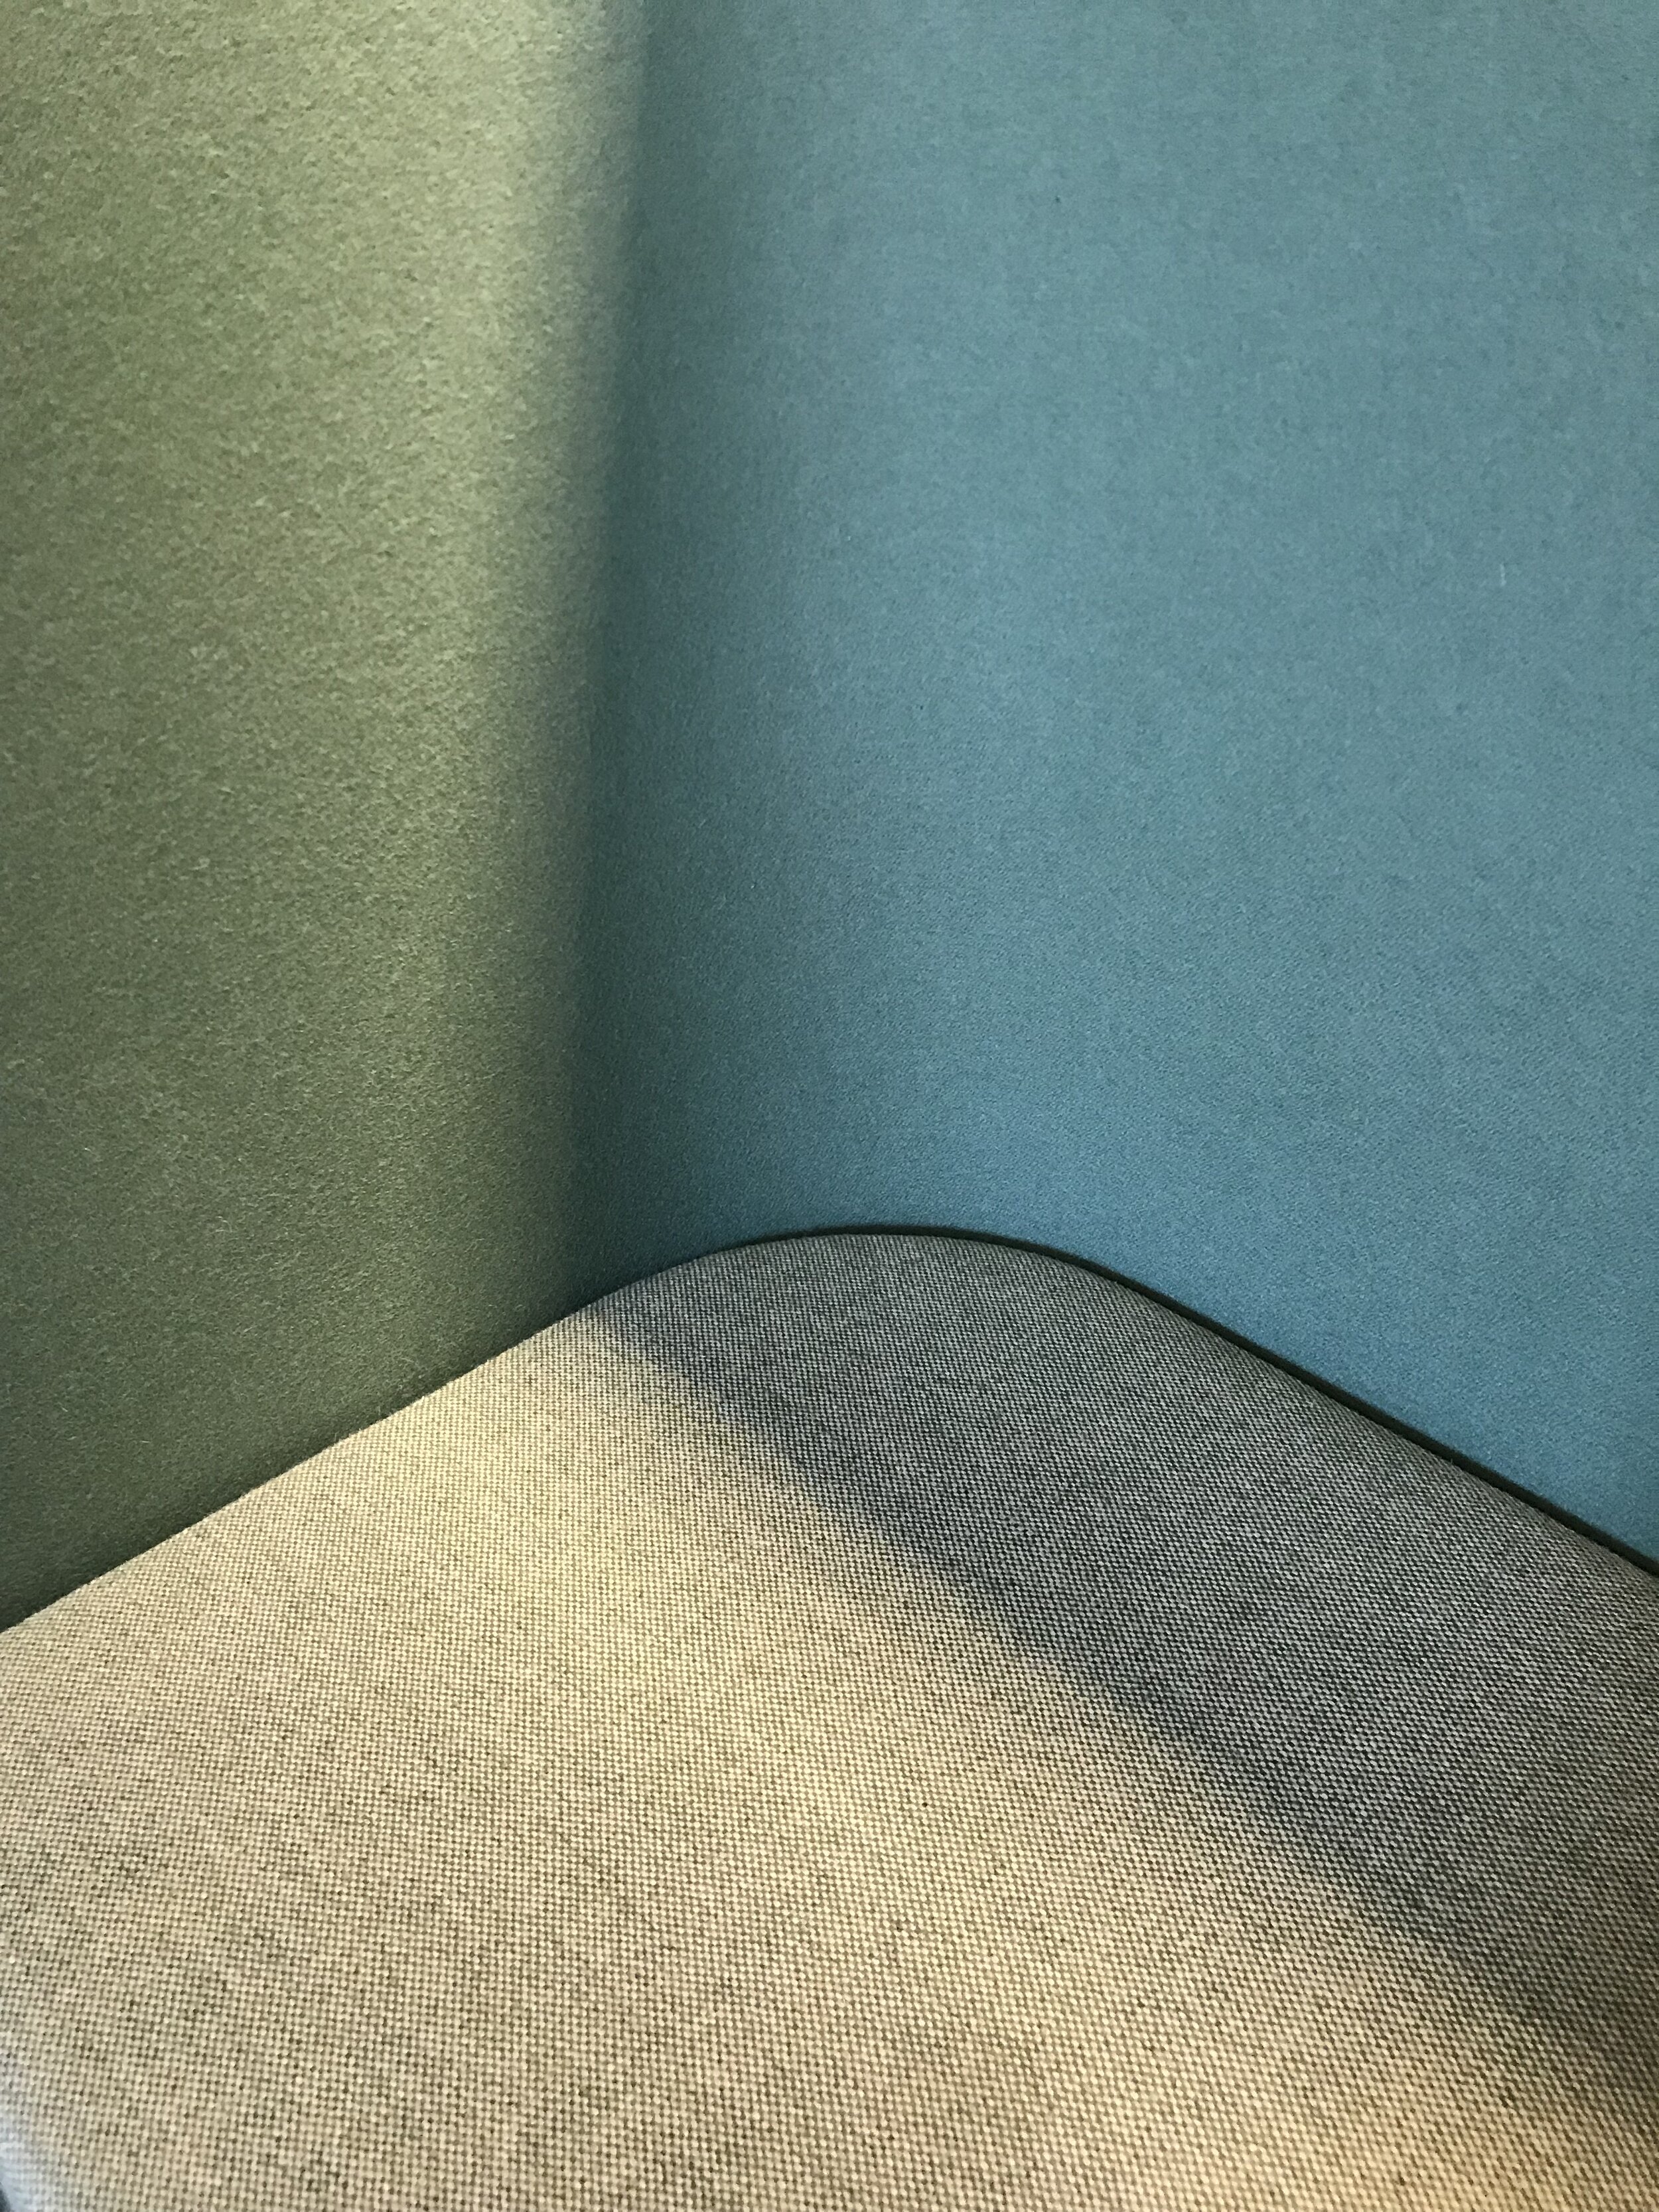  The color variation draws your eye to this full round corner detail inside a privacy pod. 